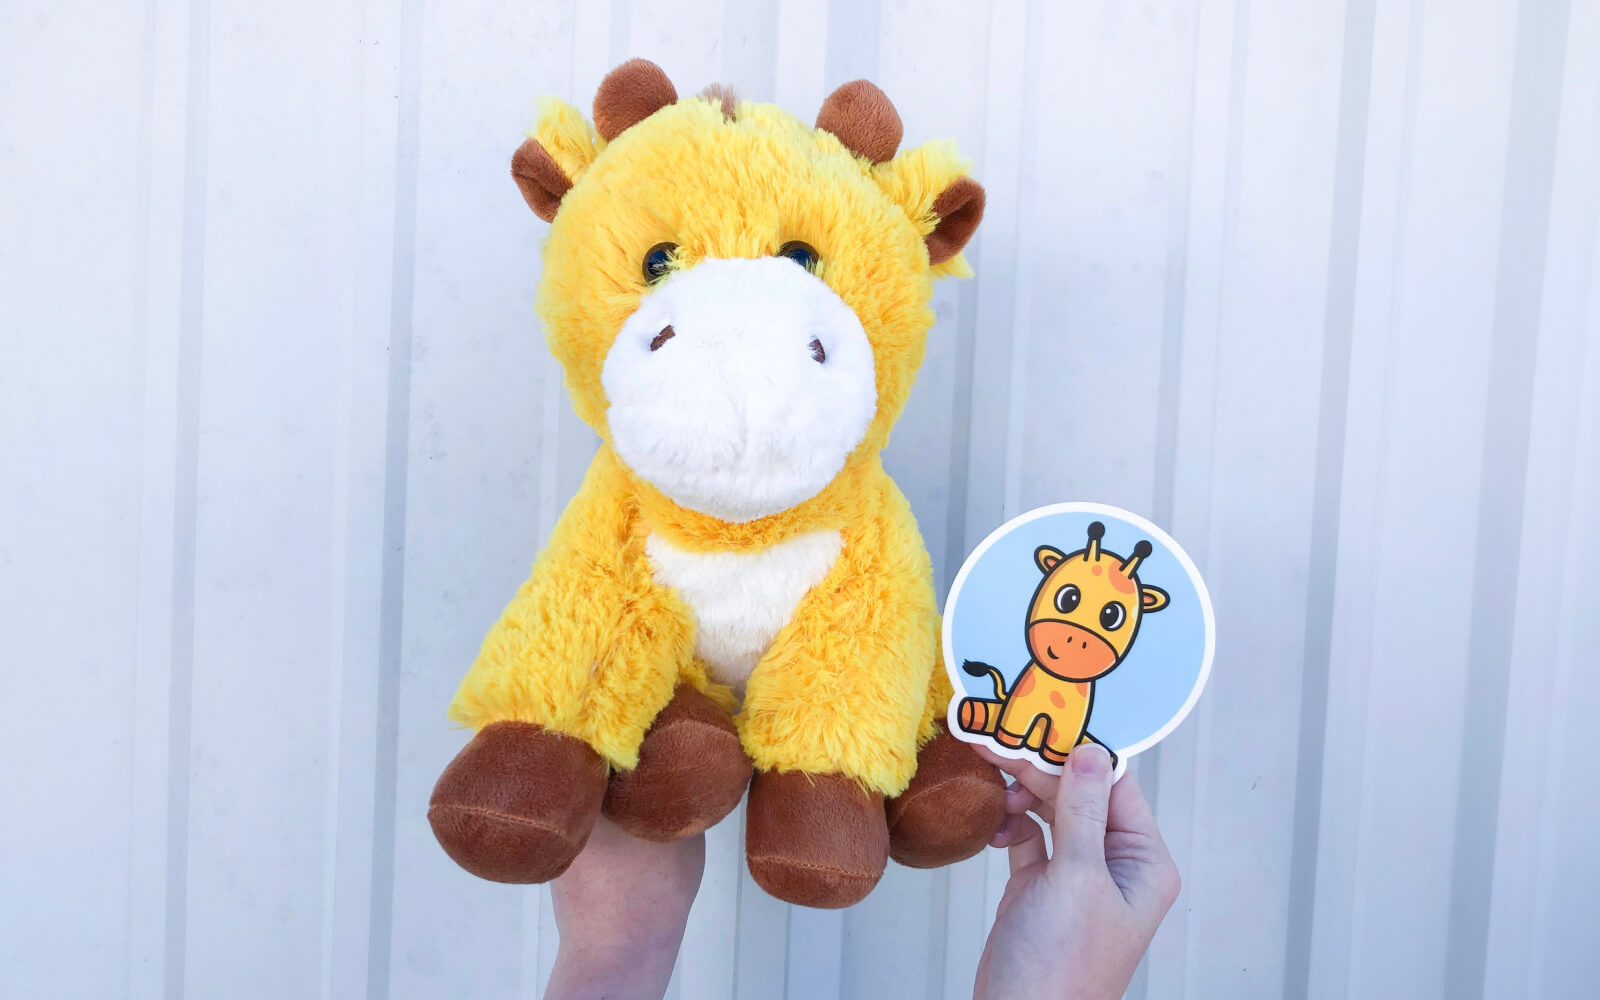 person holding giraffe stuffed animal with matching sticker in the air